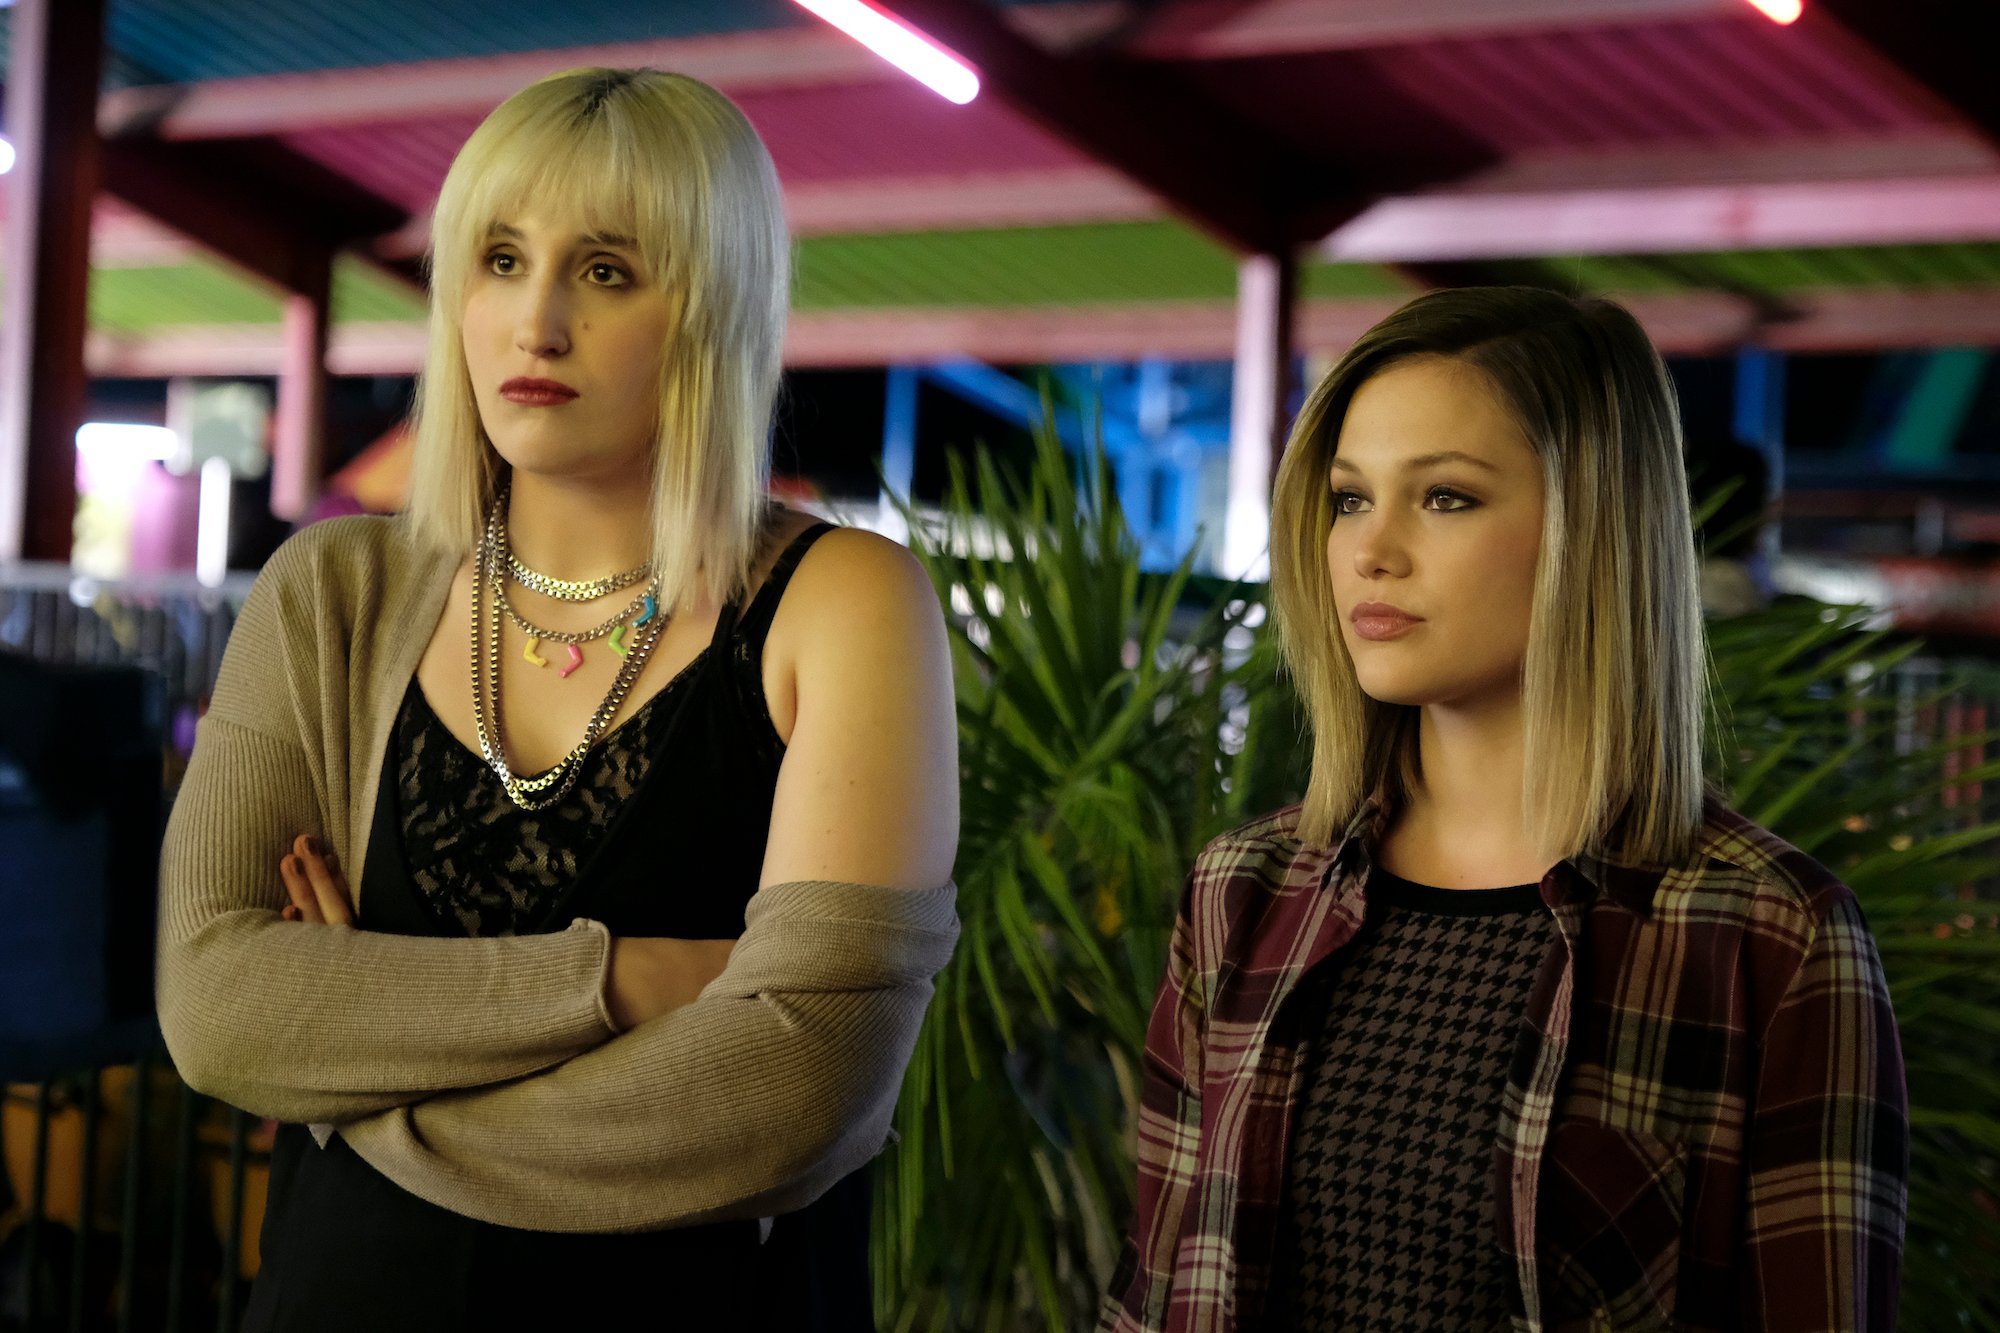 'CRUEL SUMMER' episode 5 "As The Carny Gods Intended": Harley Quinn Smith as Mallory and Olivia Holt as Kate Wallis